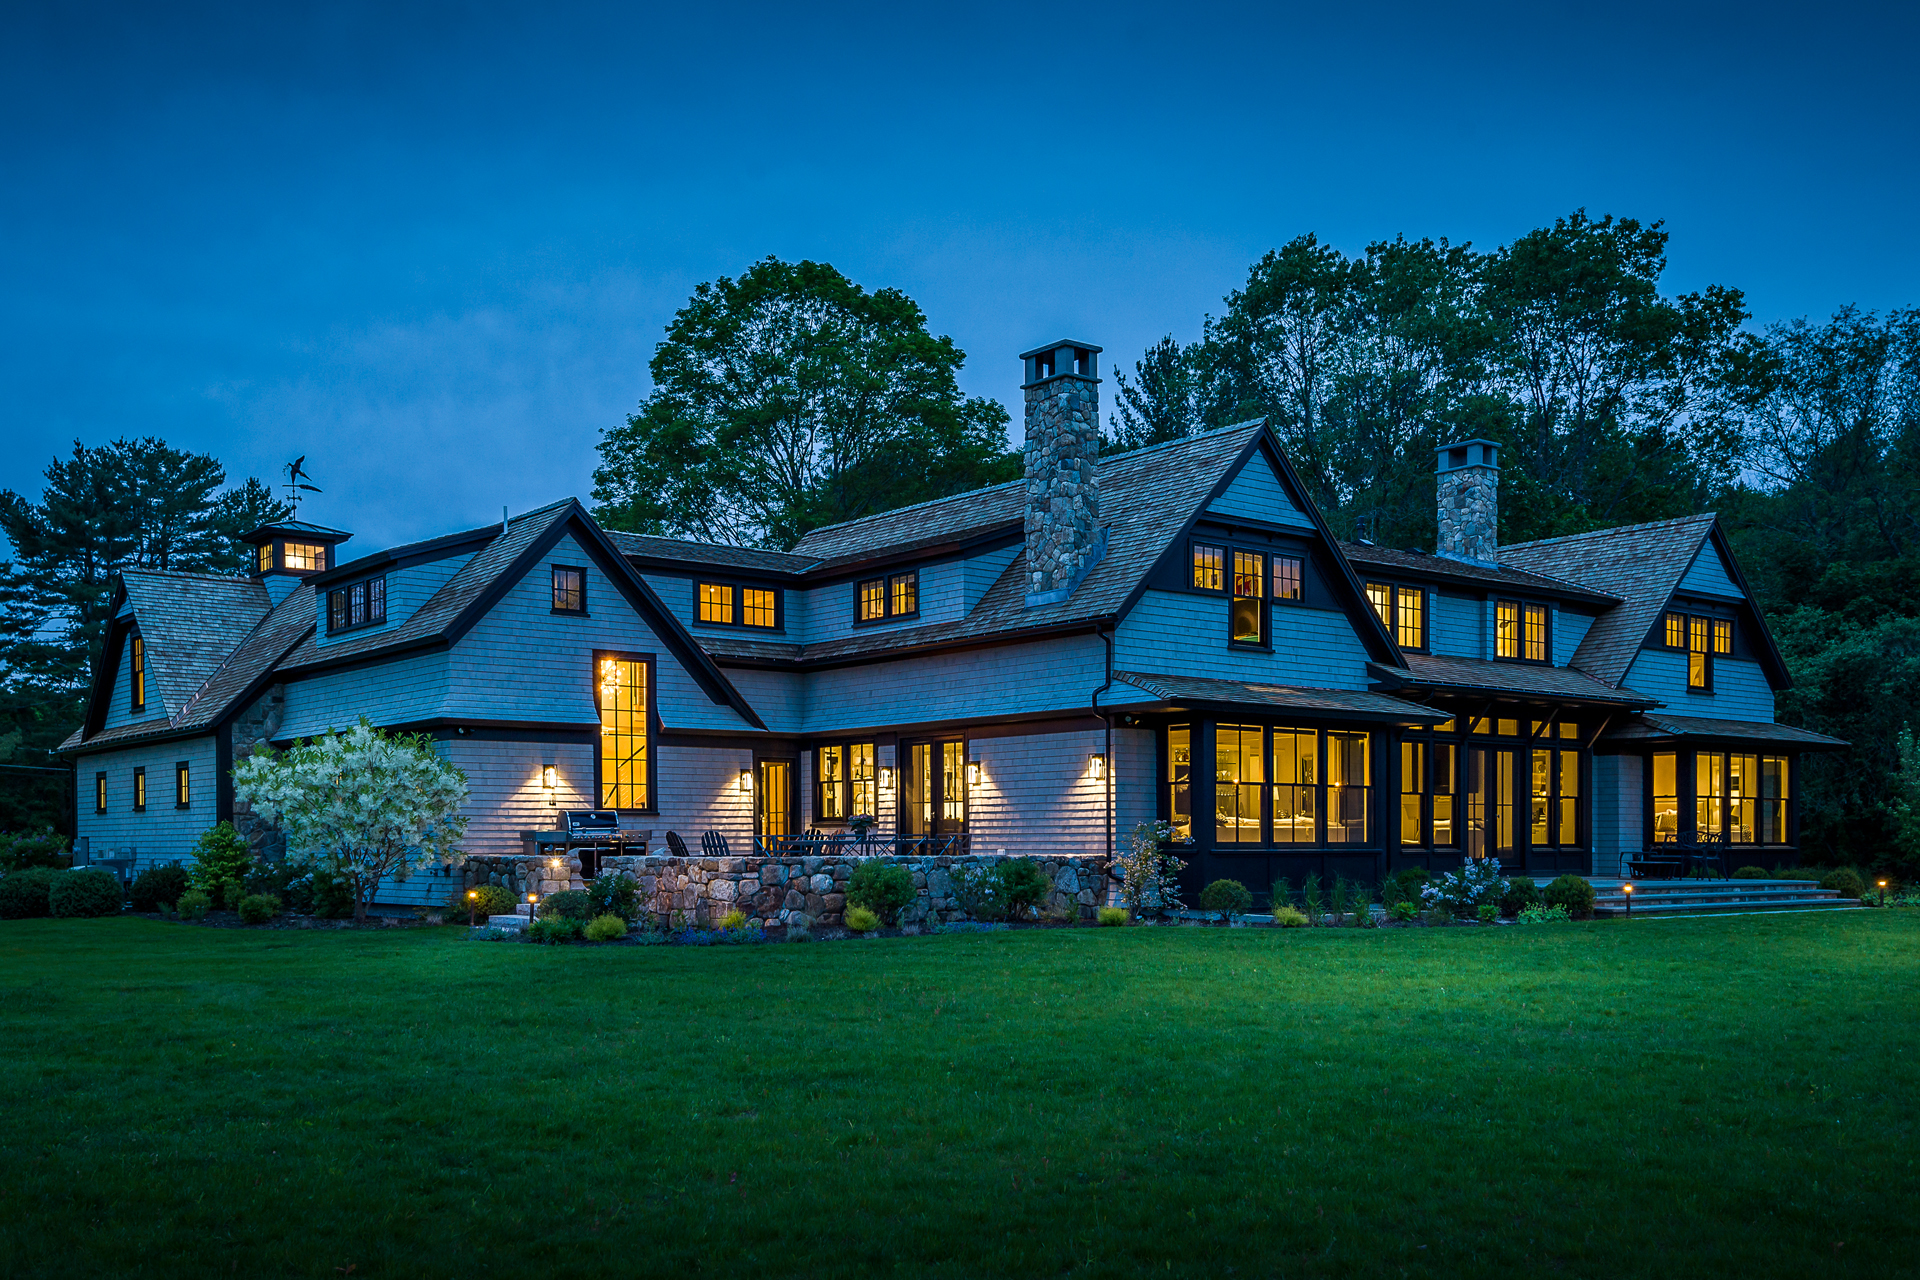 A contemporary take on a shingle-style house in Concord, Massachusetts